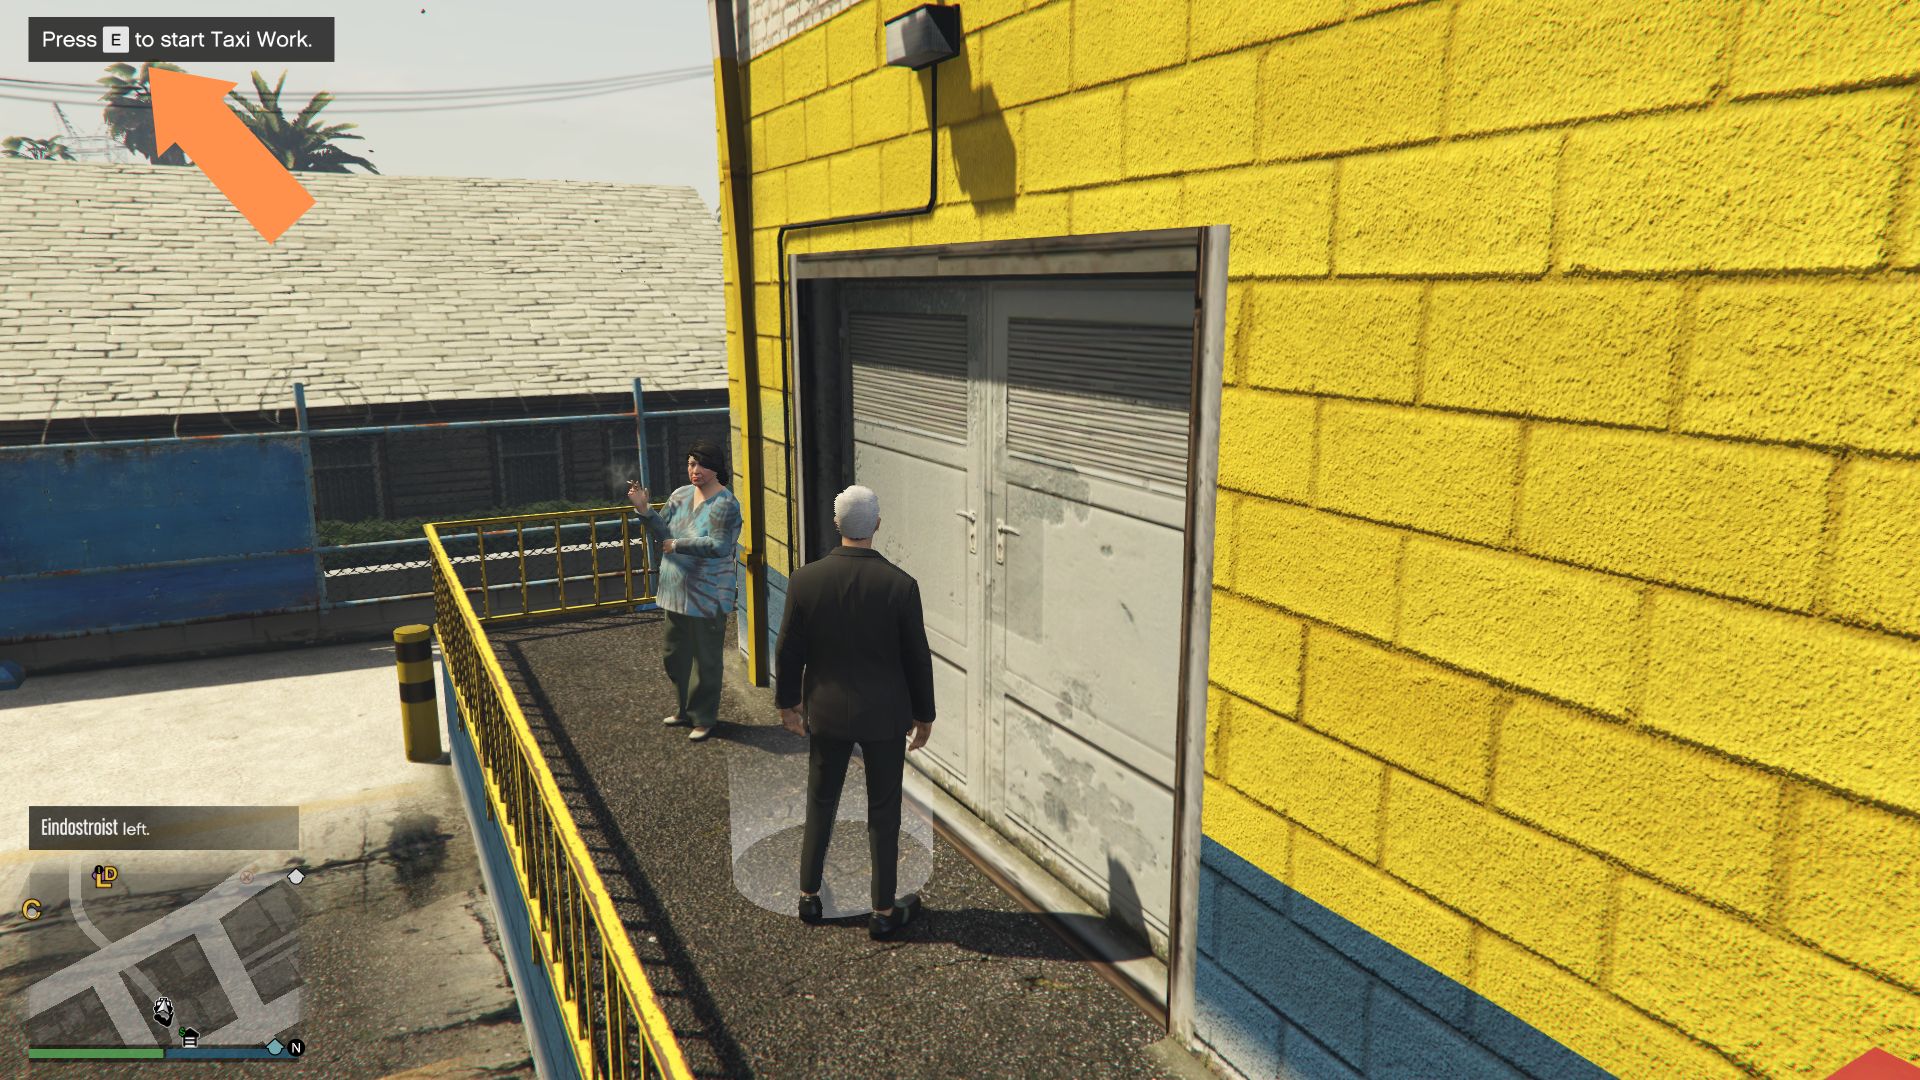 Walk into the while circle to start your taxi business in GTA 5